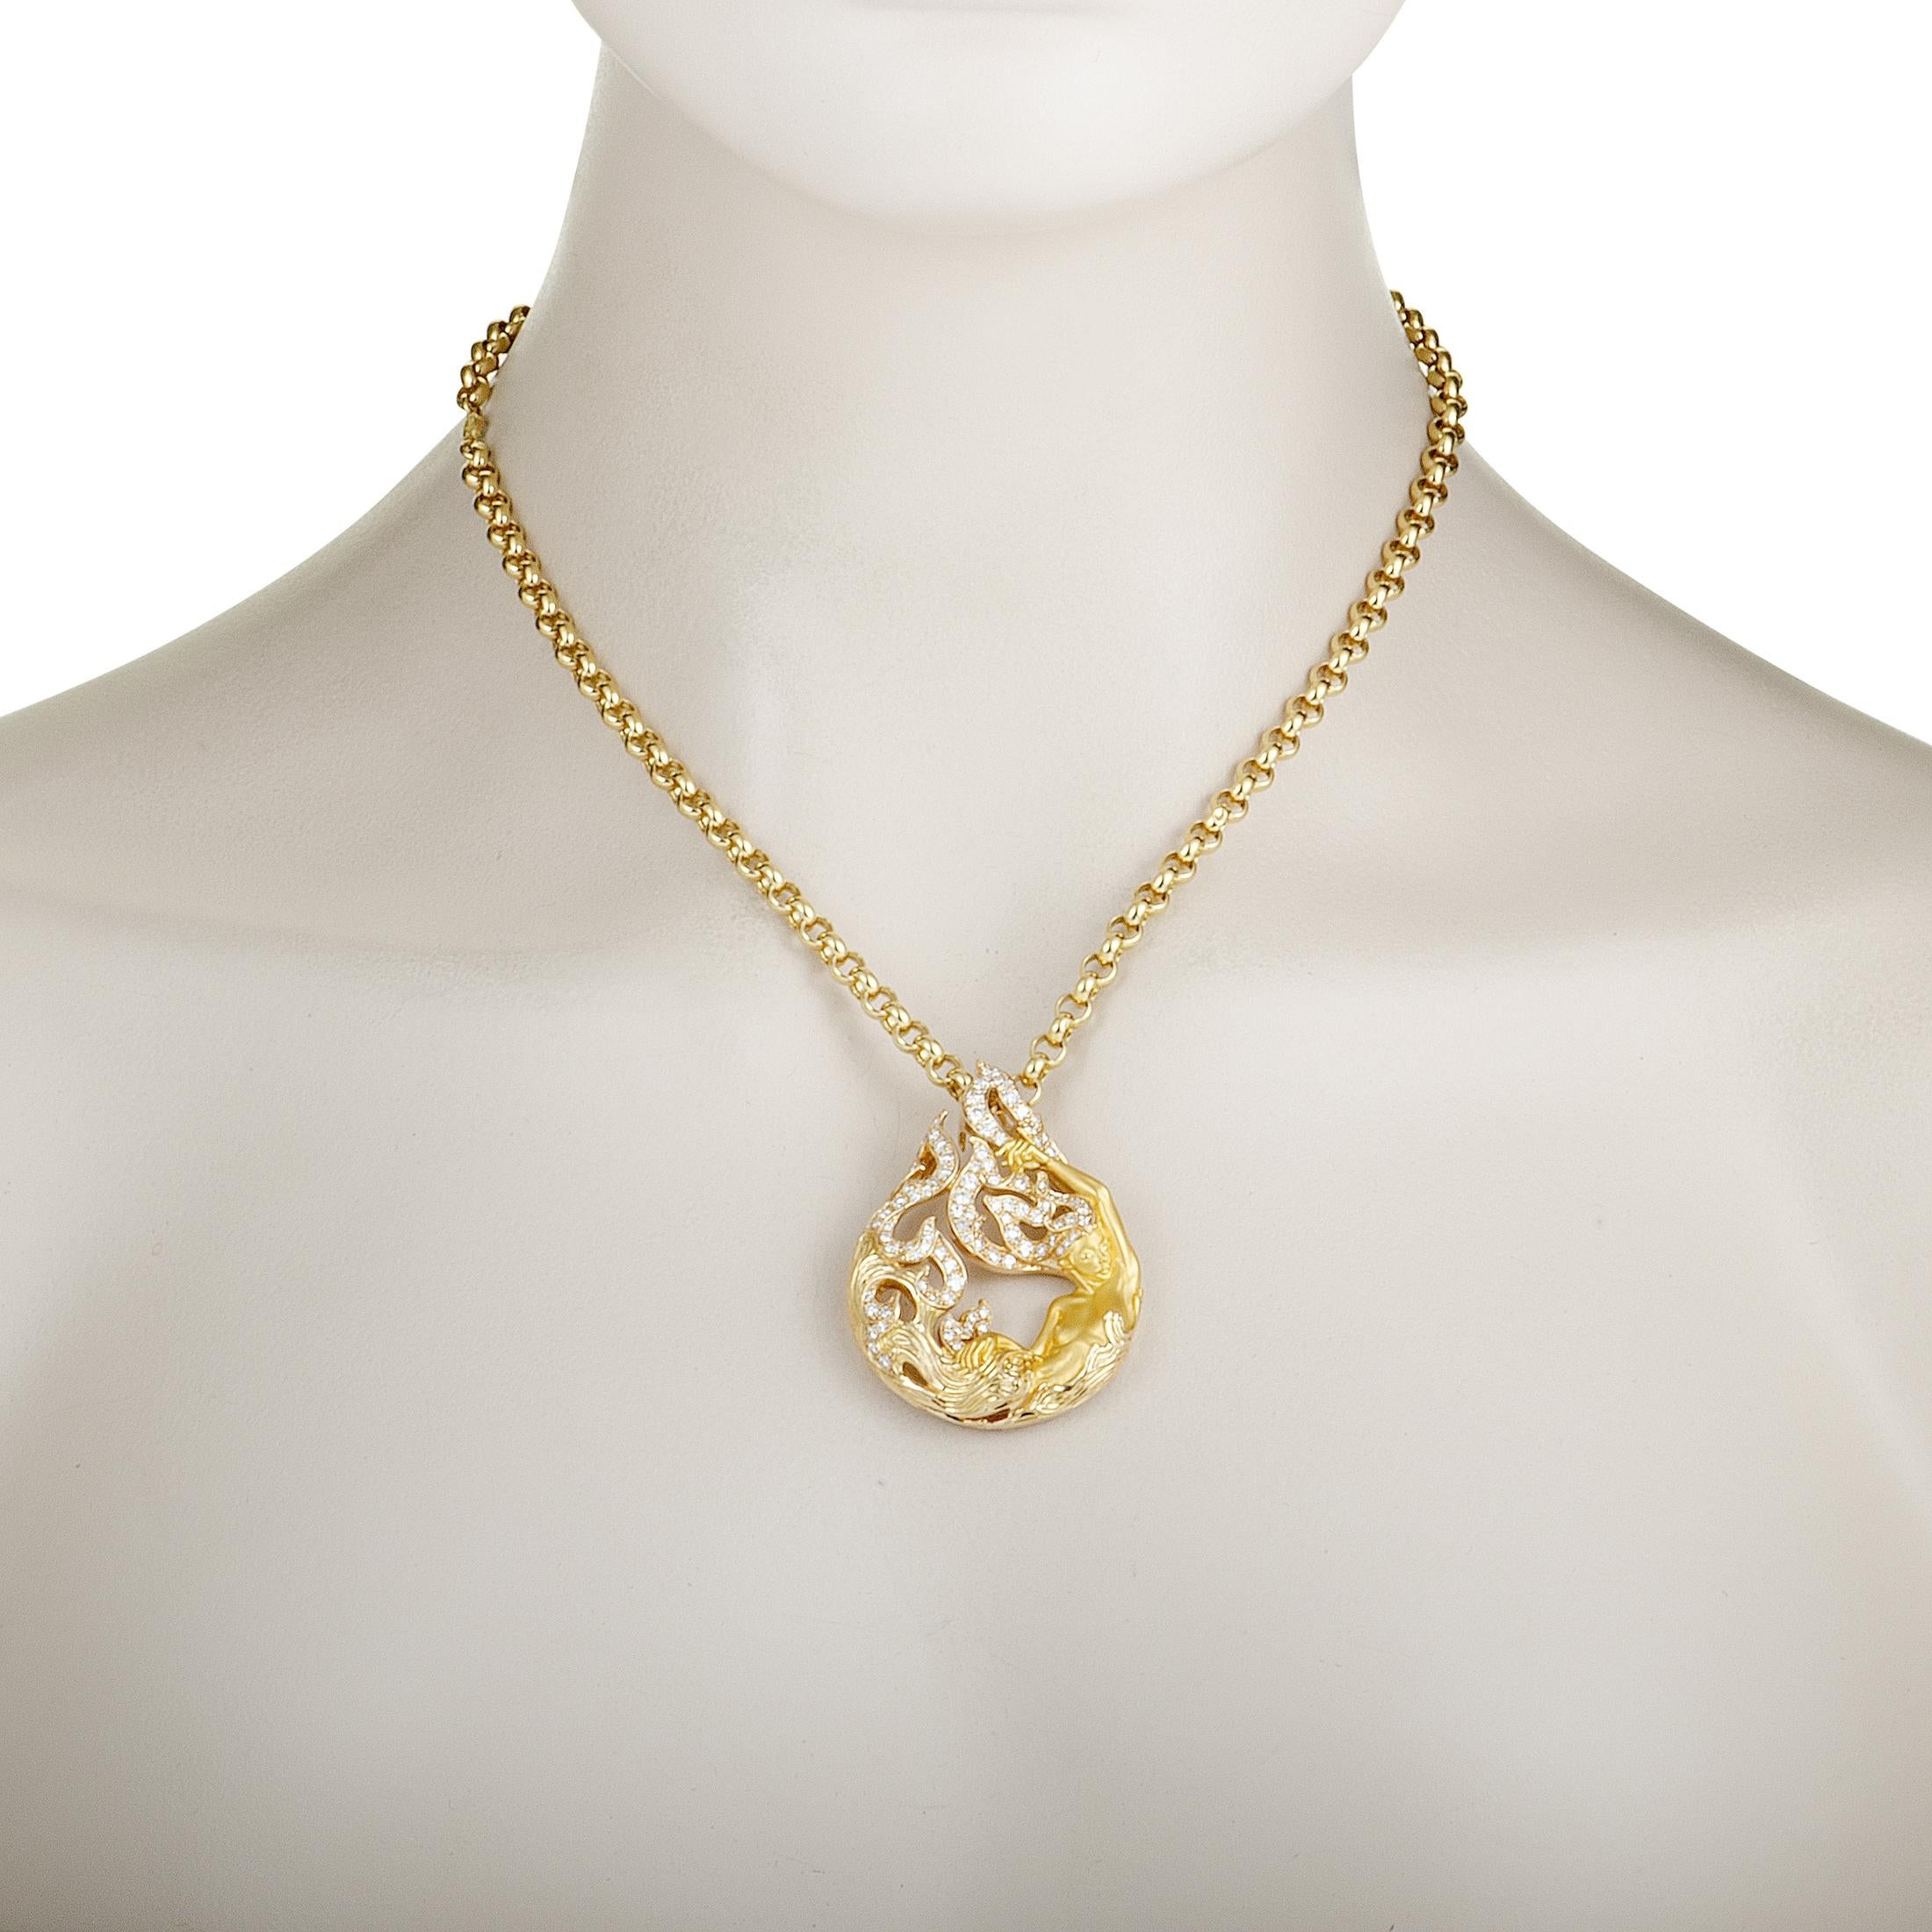 Designed for the extraordinary “New Fire” collection by Magerit, this fascinating “Diosa Tear” necklace offers an incredibly attractive appearance that will add a fashionably luxe twist to your ensembles. The necklace is crafted from 18K yellow gold